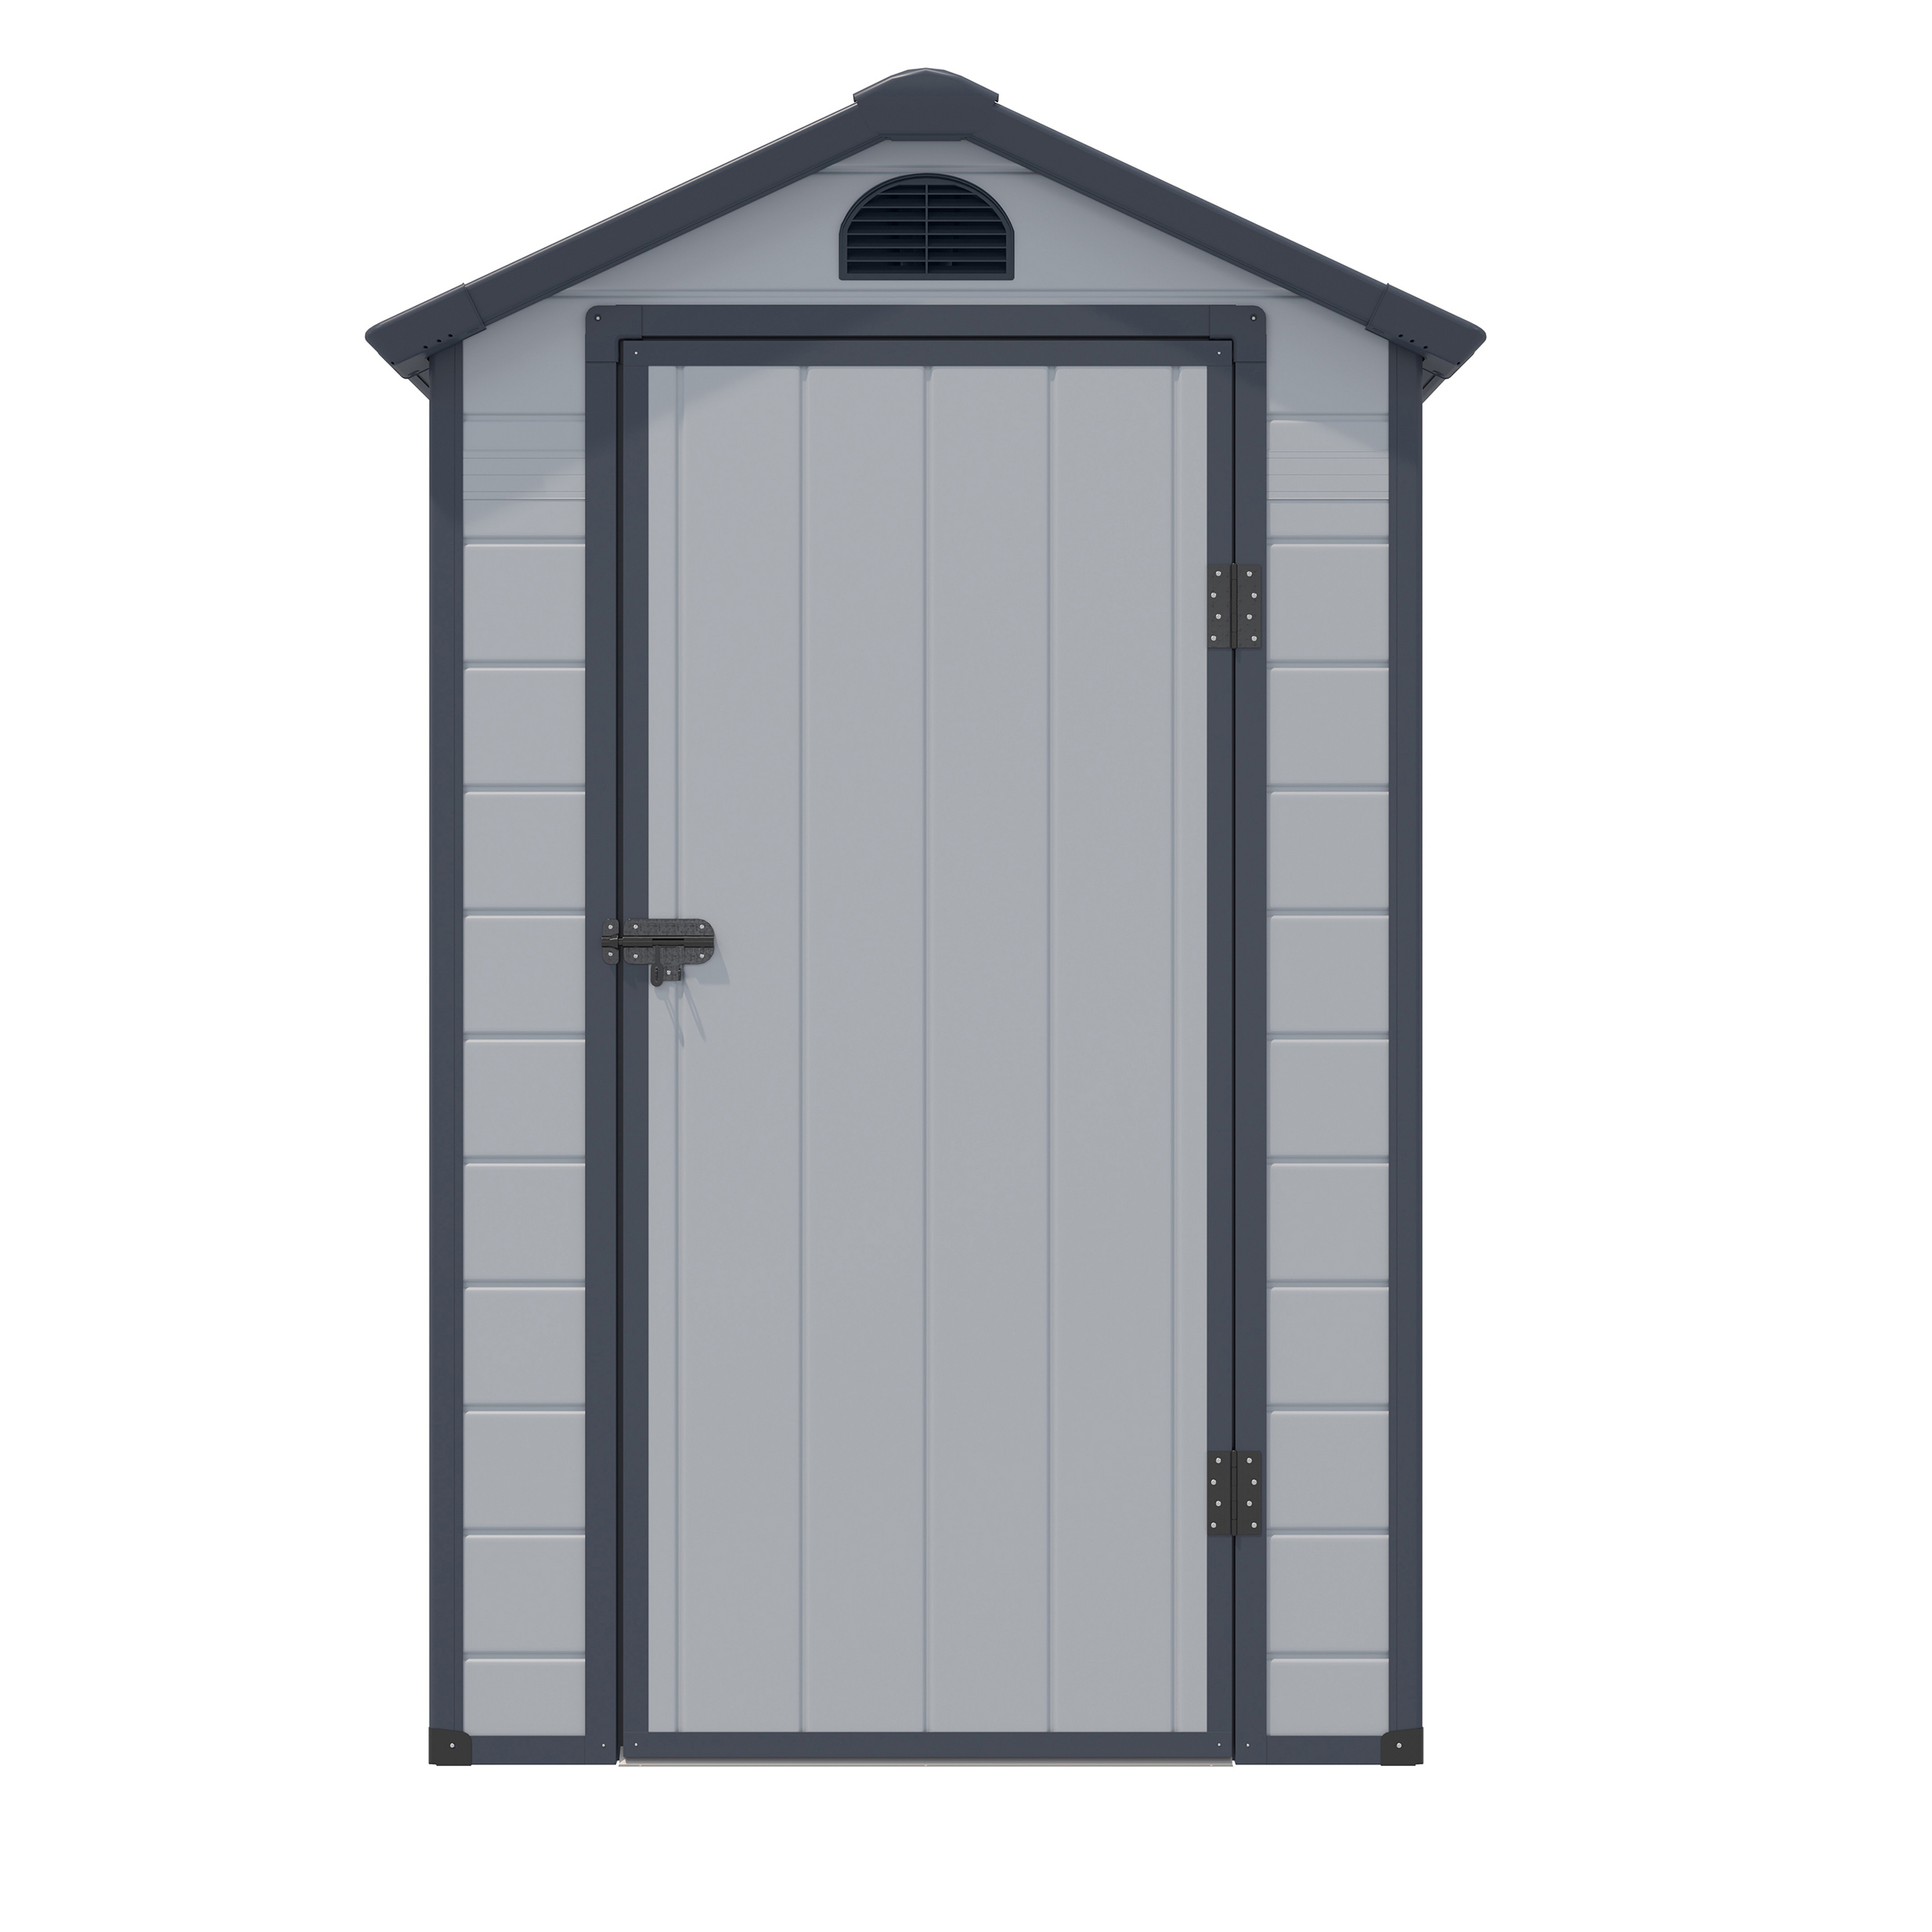 Featured image for “RGP | Airevale™ Apex Shed 4x3 (Light Grey)”